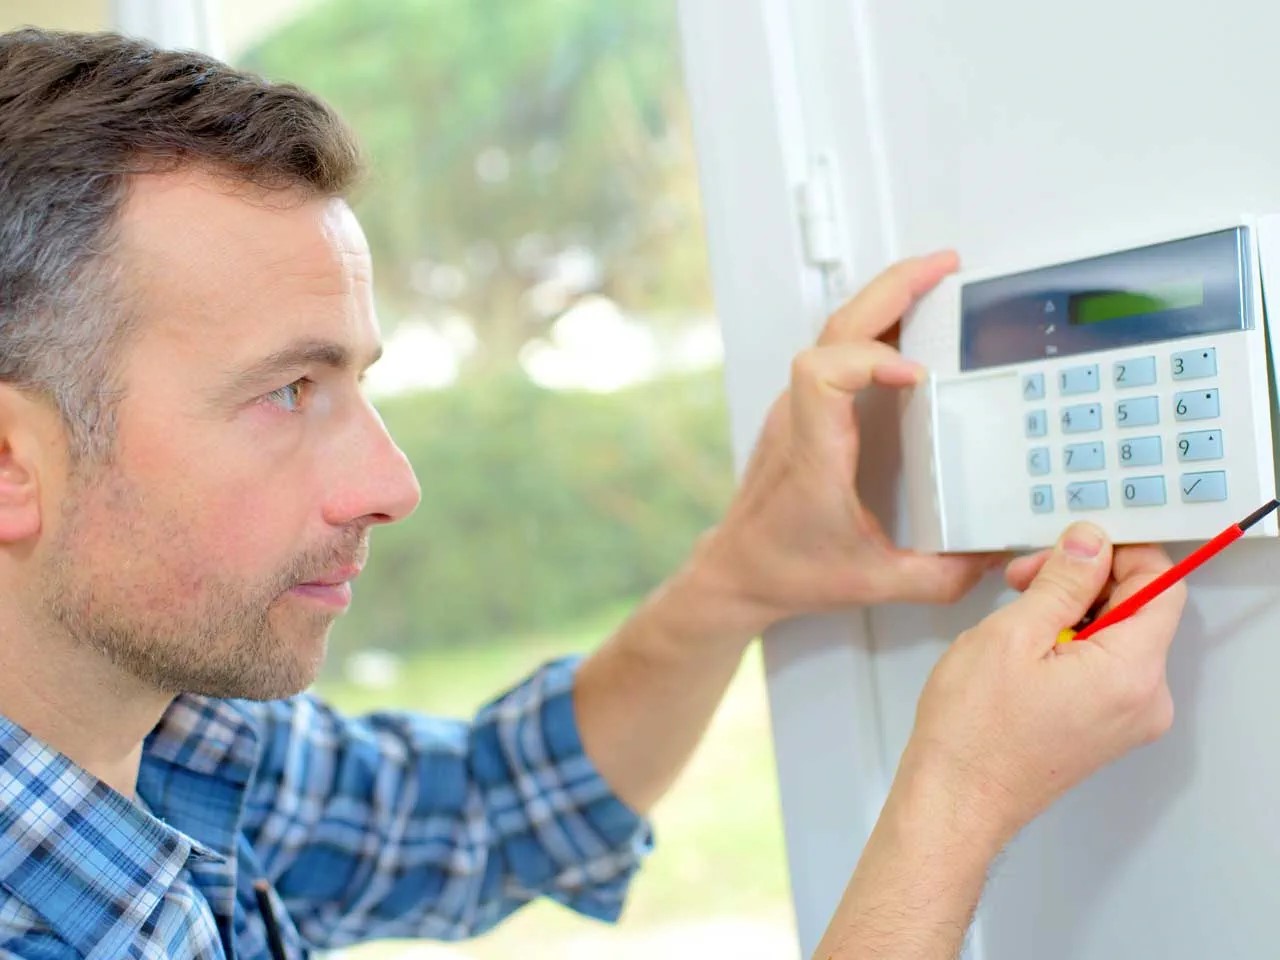 How To Install Alarm Systems